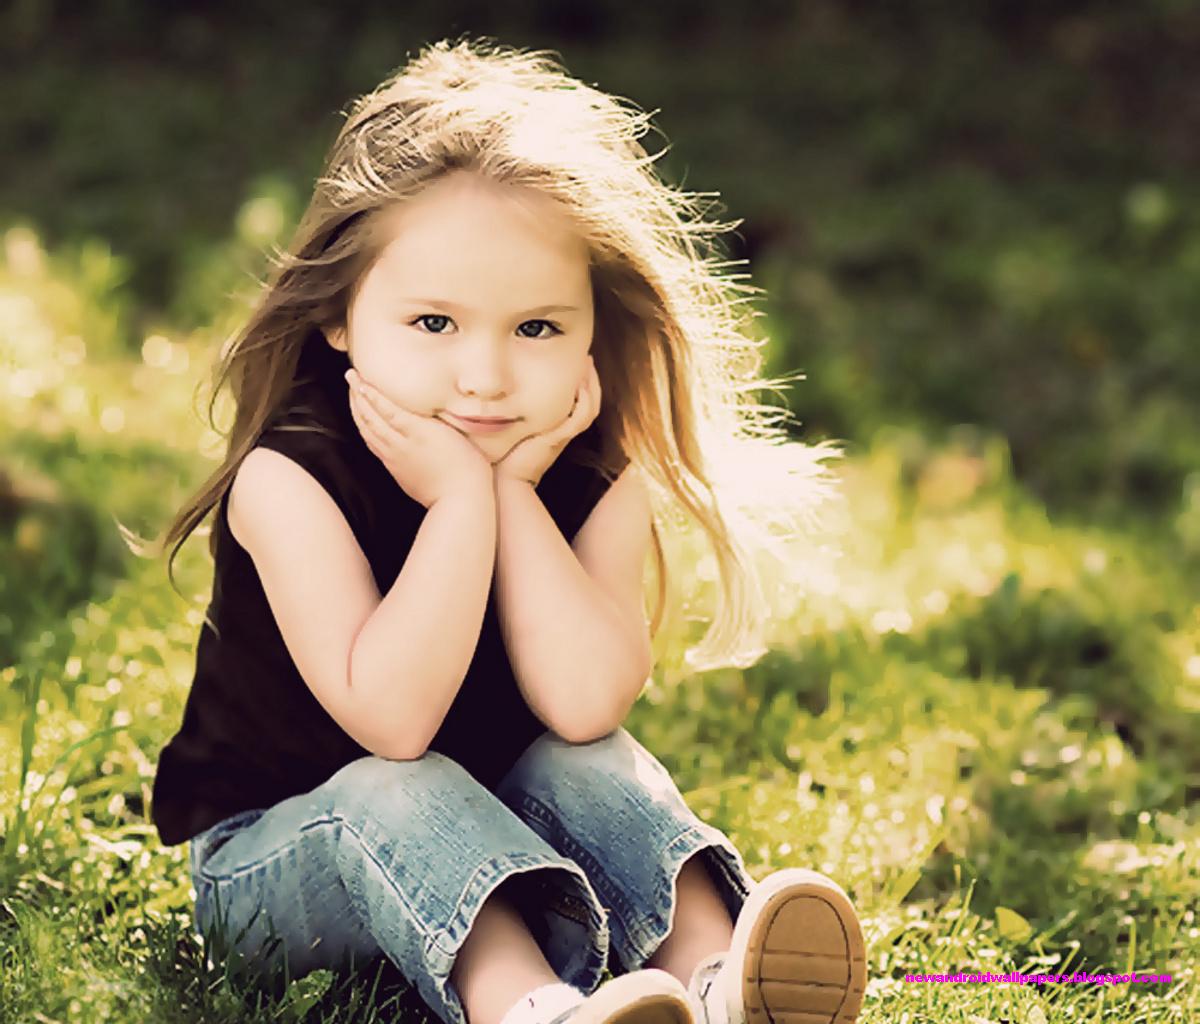 Cute And Nice Baby Wallpapers In High Quality Free